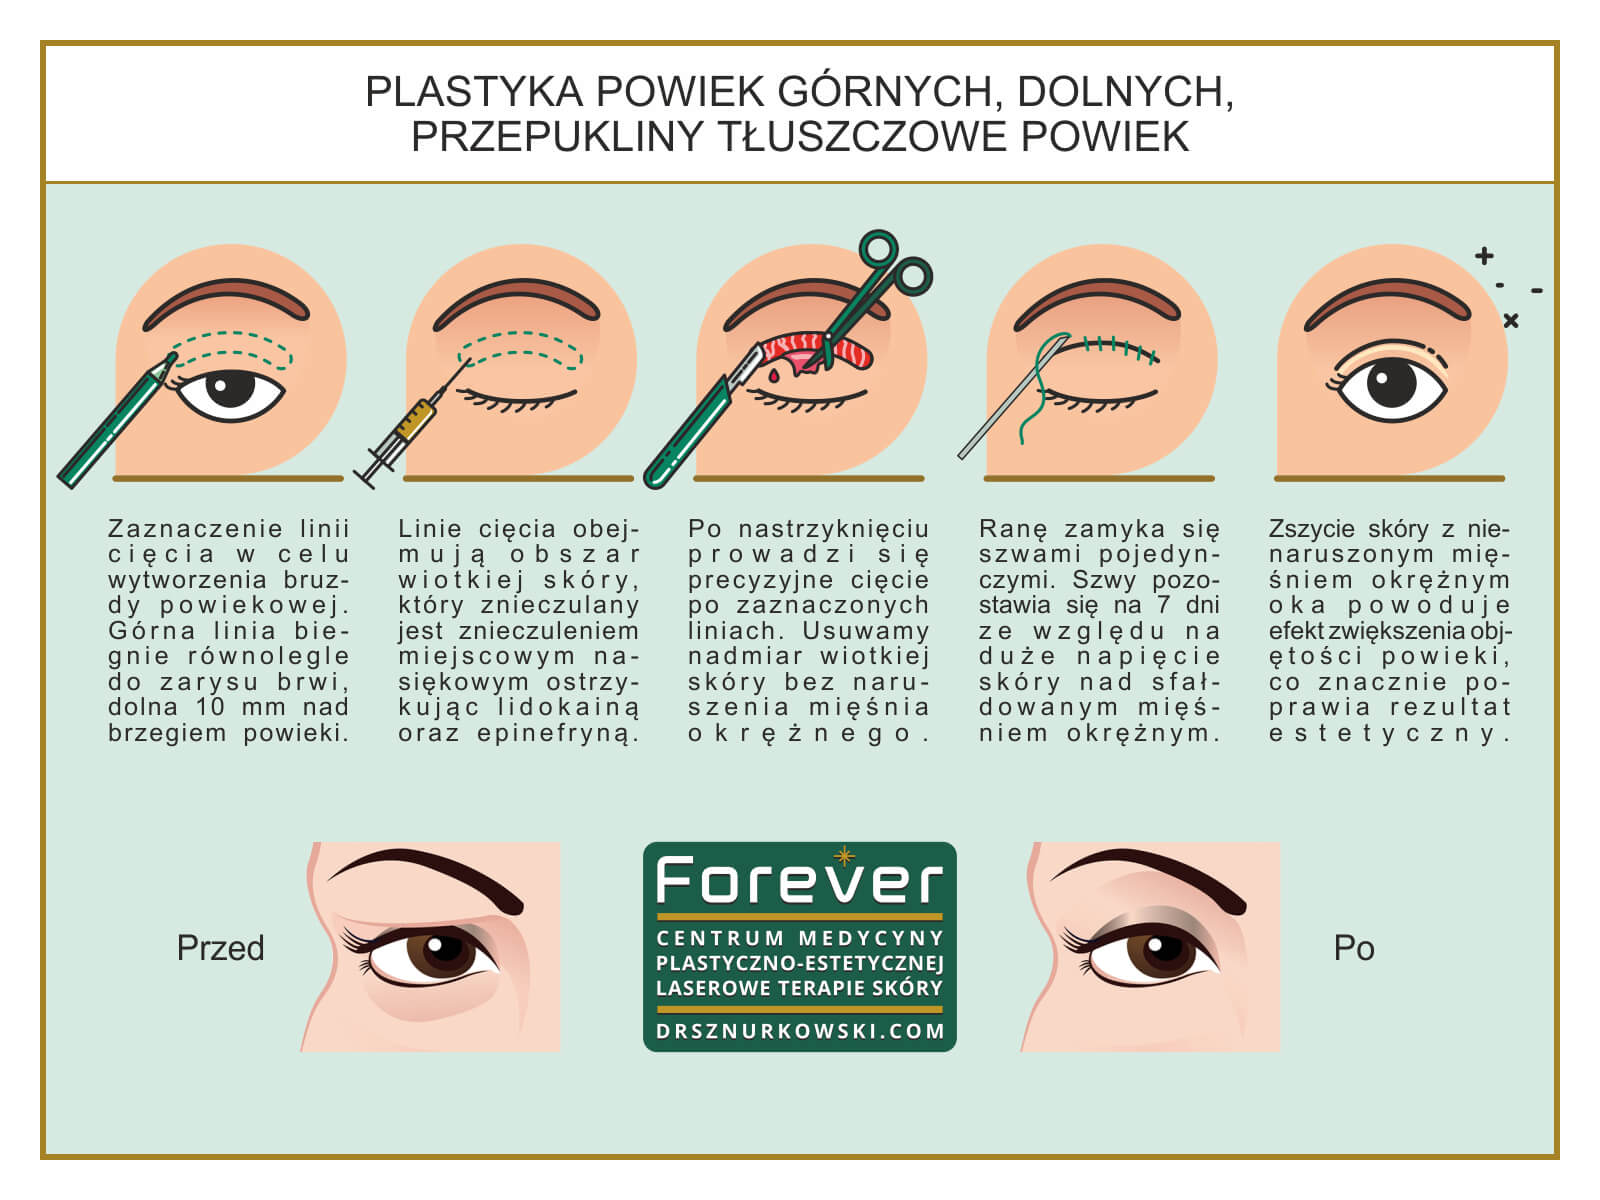 Blepharoplasty - Removing The Excess of Limp Skin From Eyelids (80x60) PL.jpg